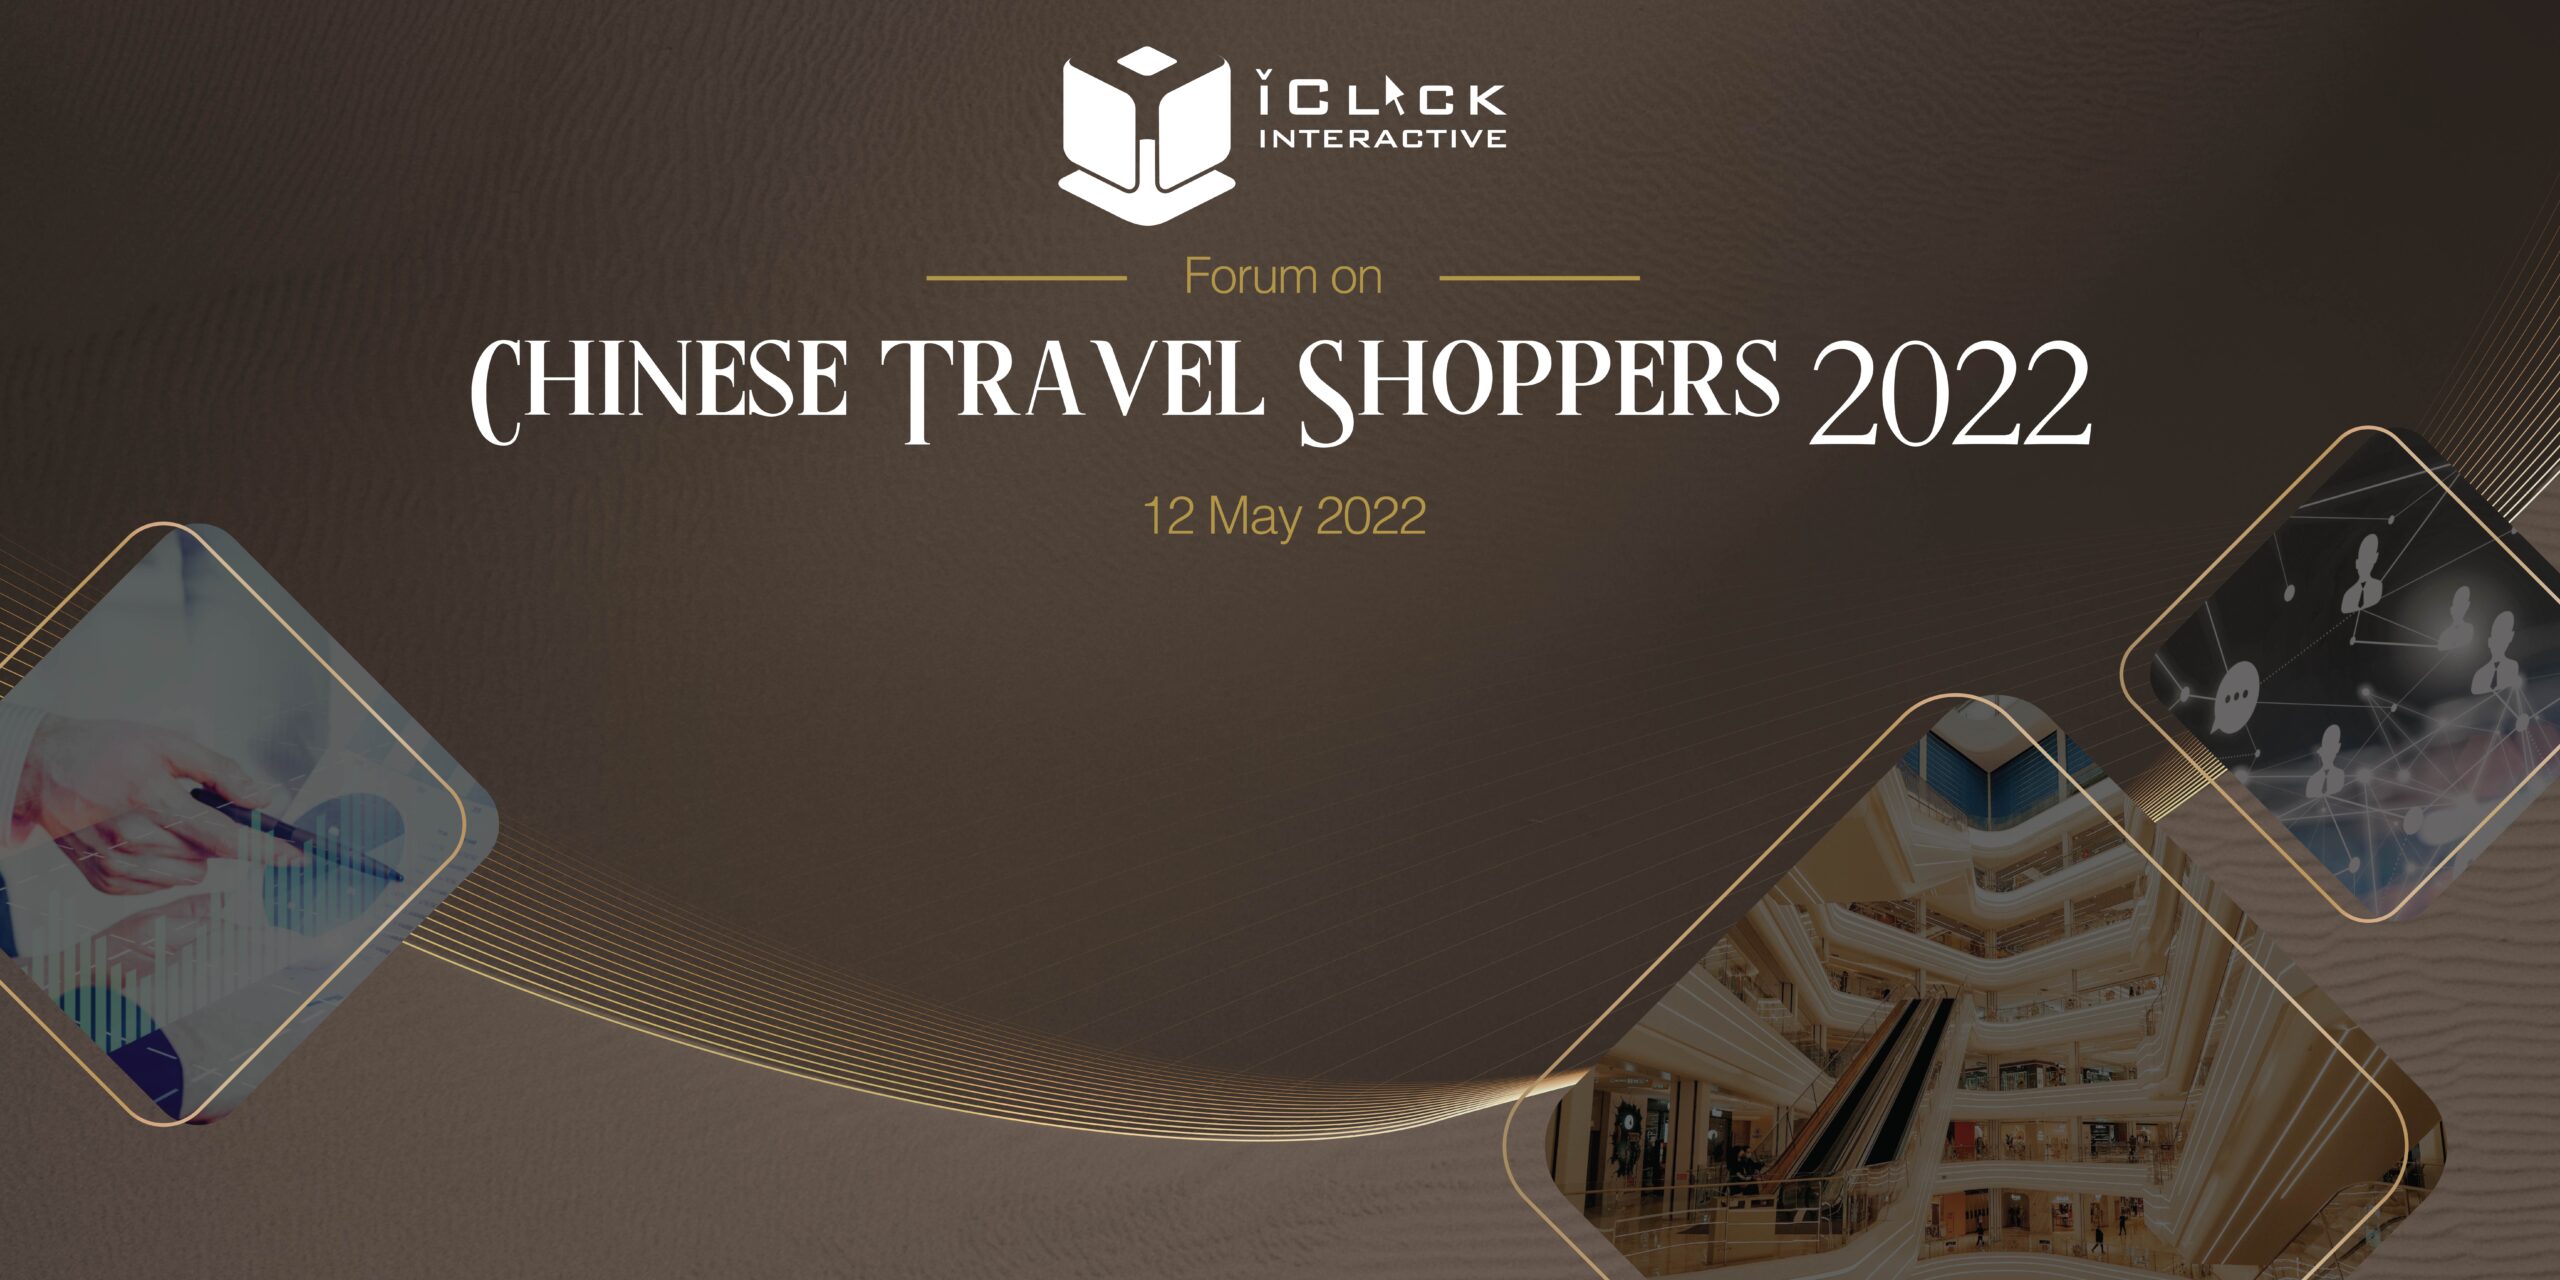 iClick’s Release of Travel Retail Whitepaper Roadshow in Singapore